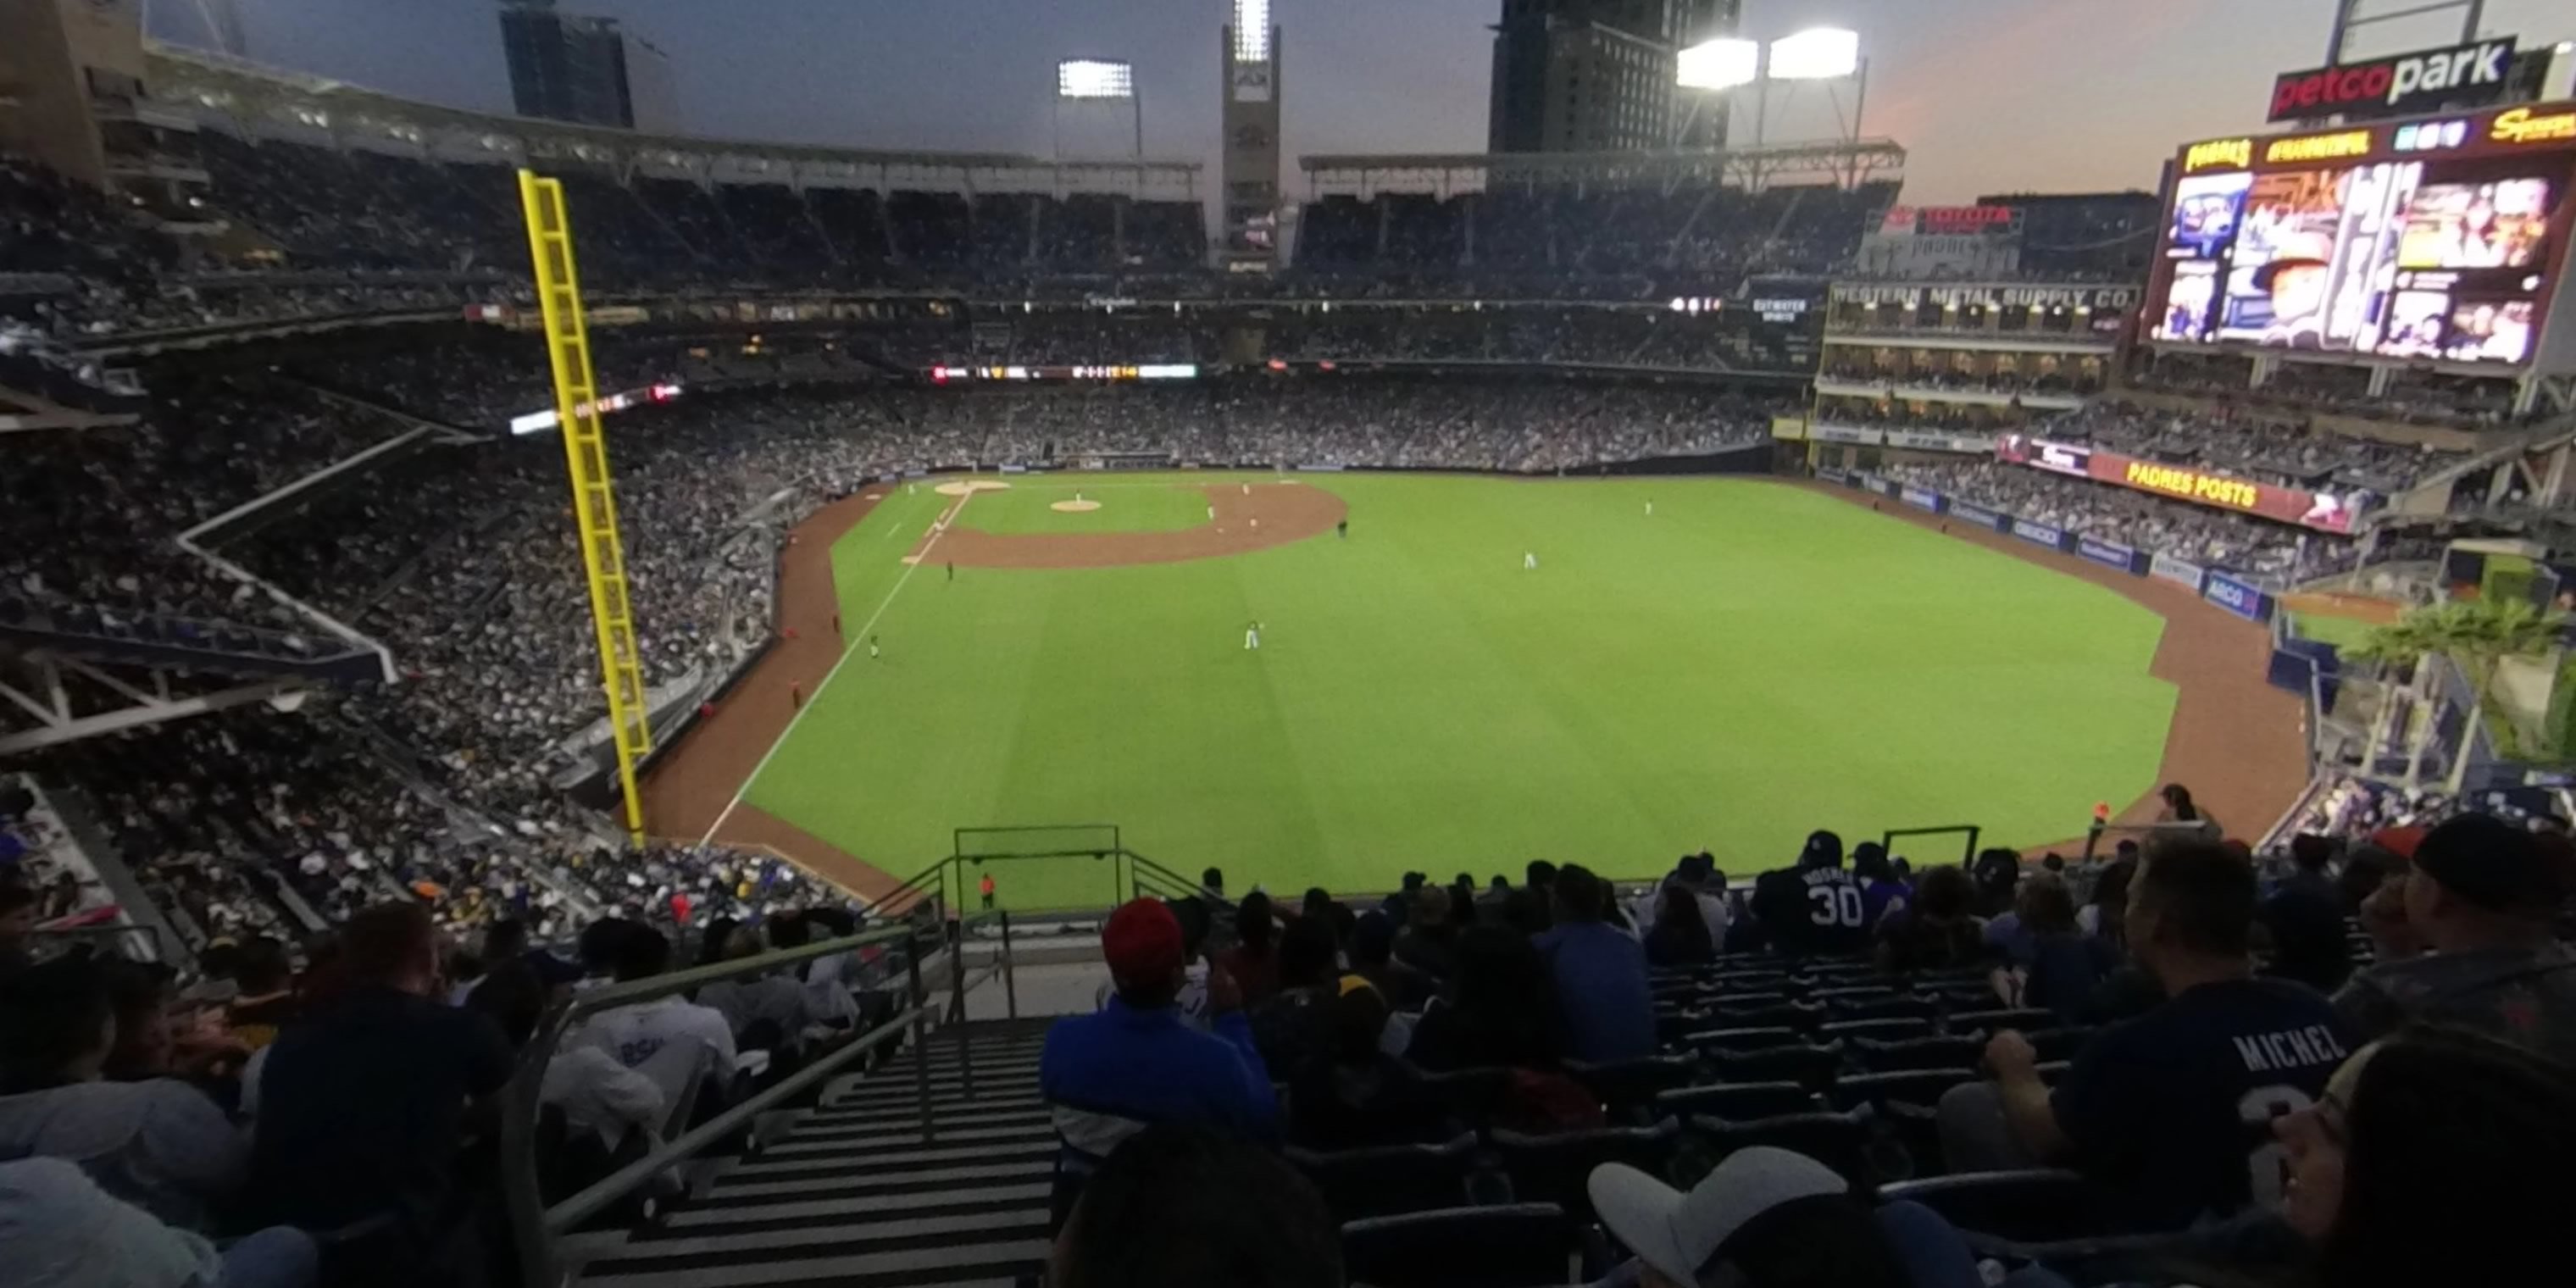 section 231 panoramic seat view  for baseball - petco park